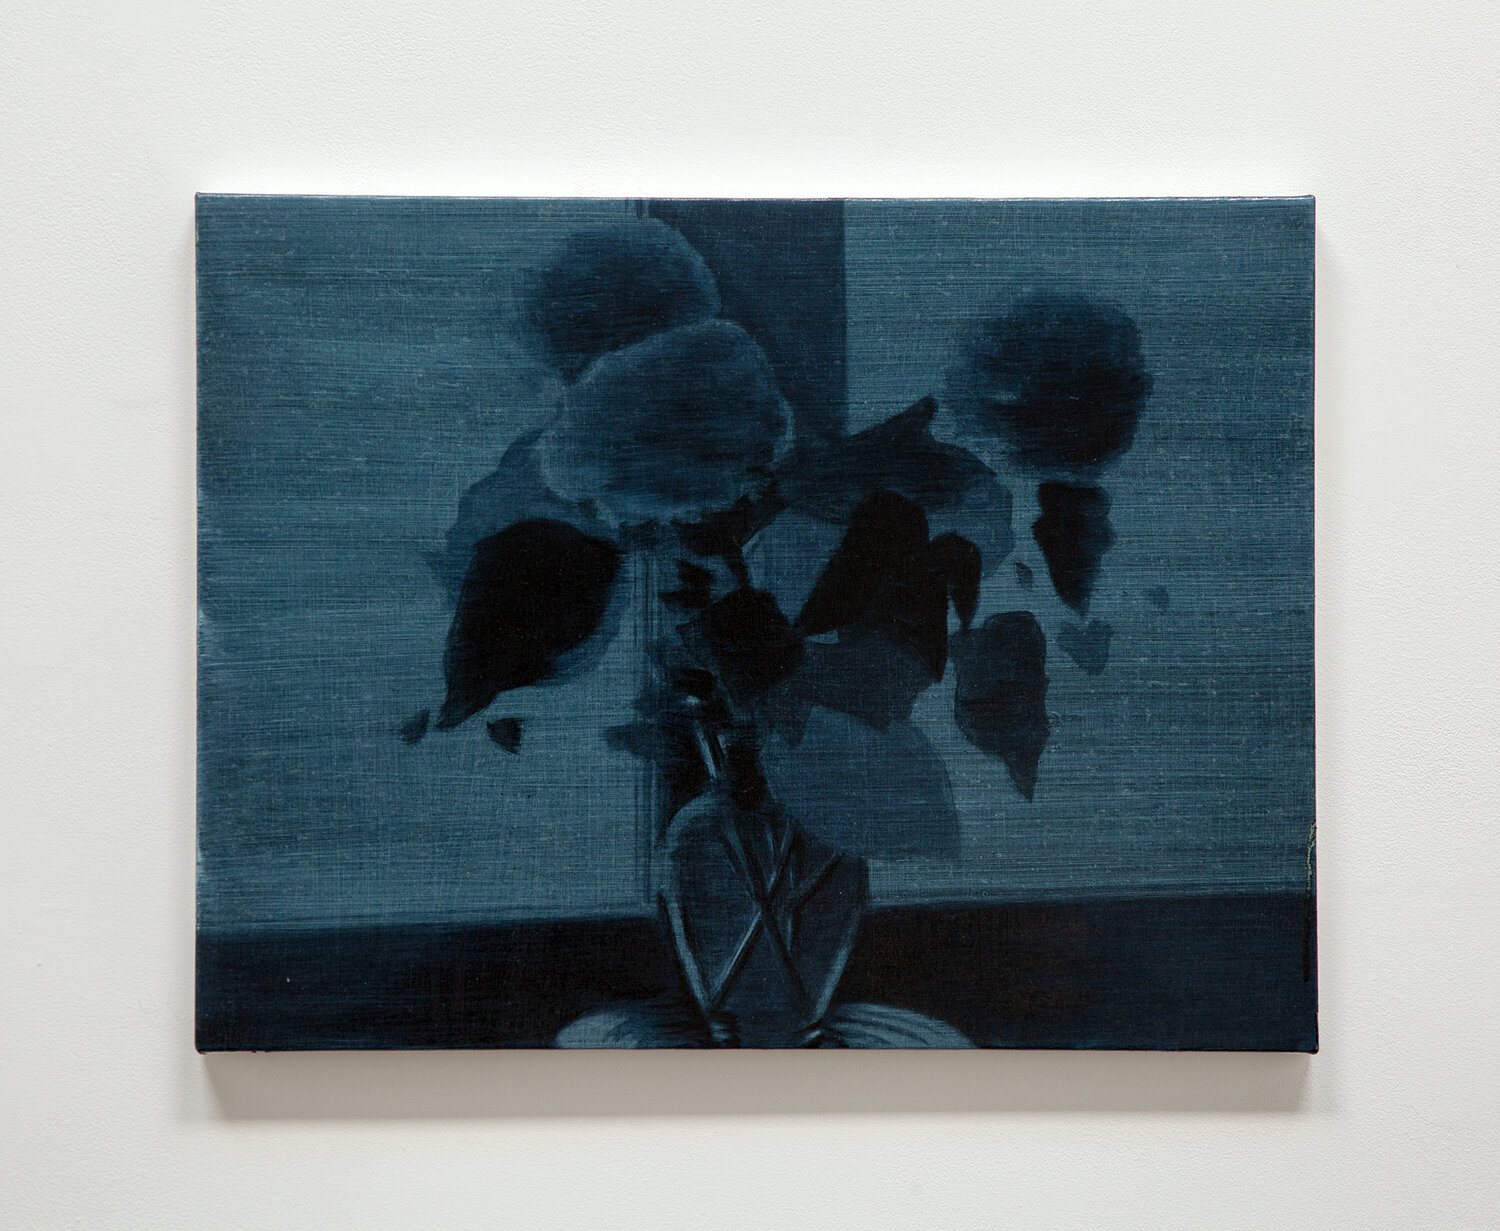   Bouquet Silhouette (dark blue)   2019 oil on canvas on panel 16 x 24 inches 